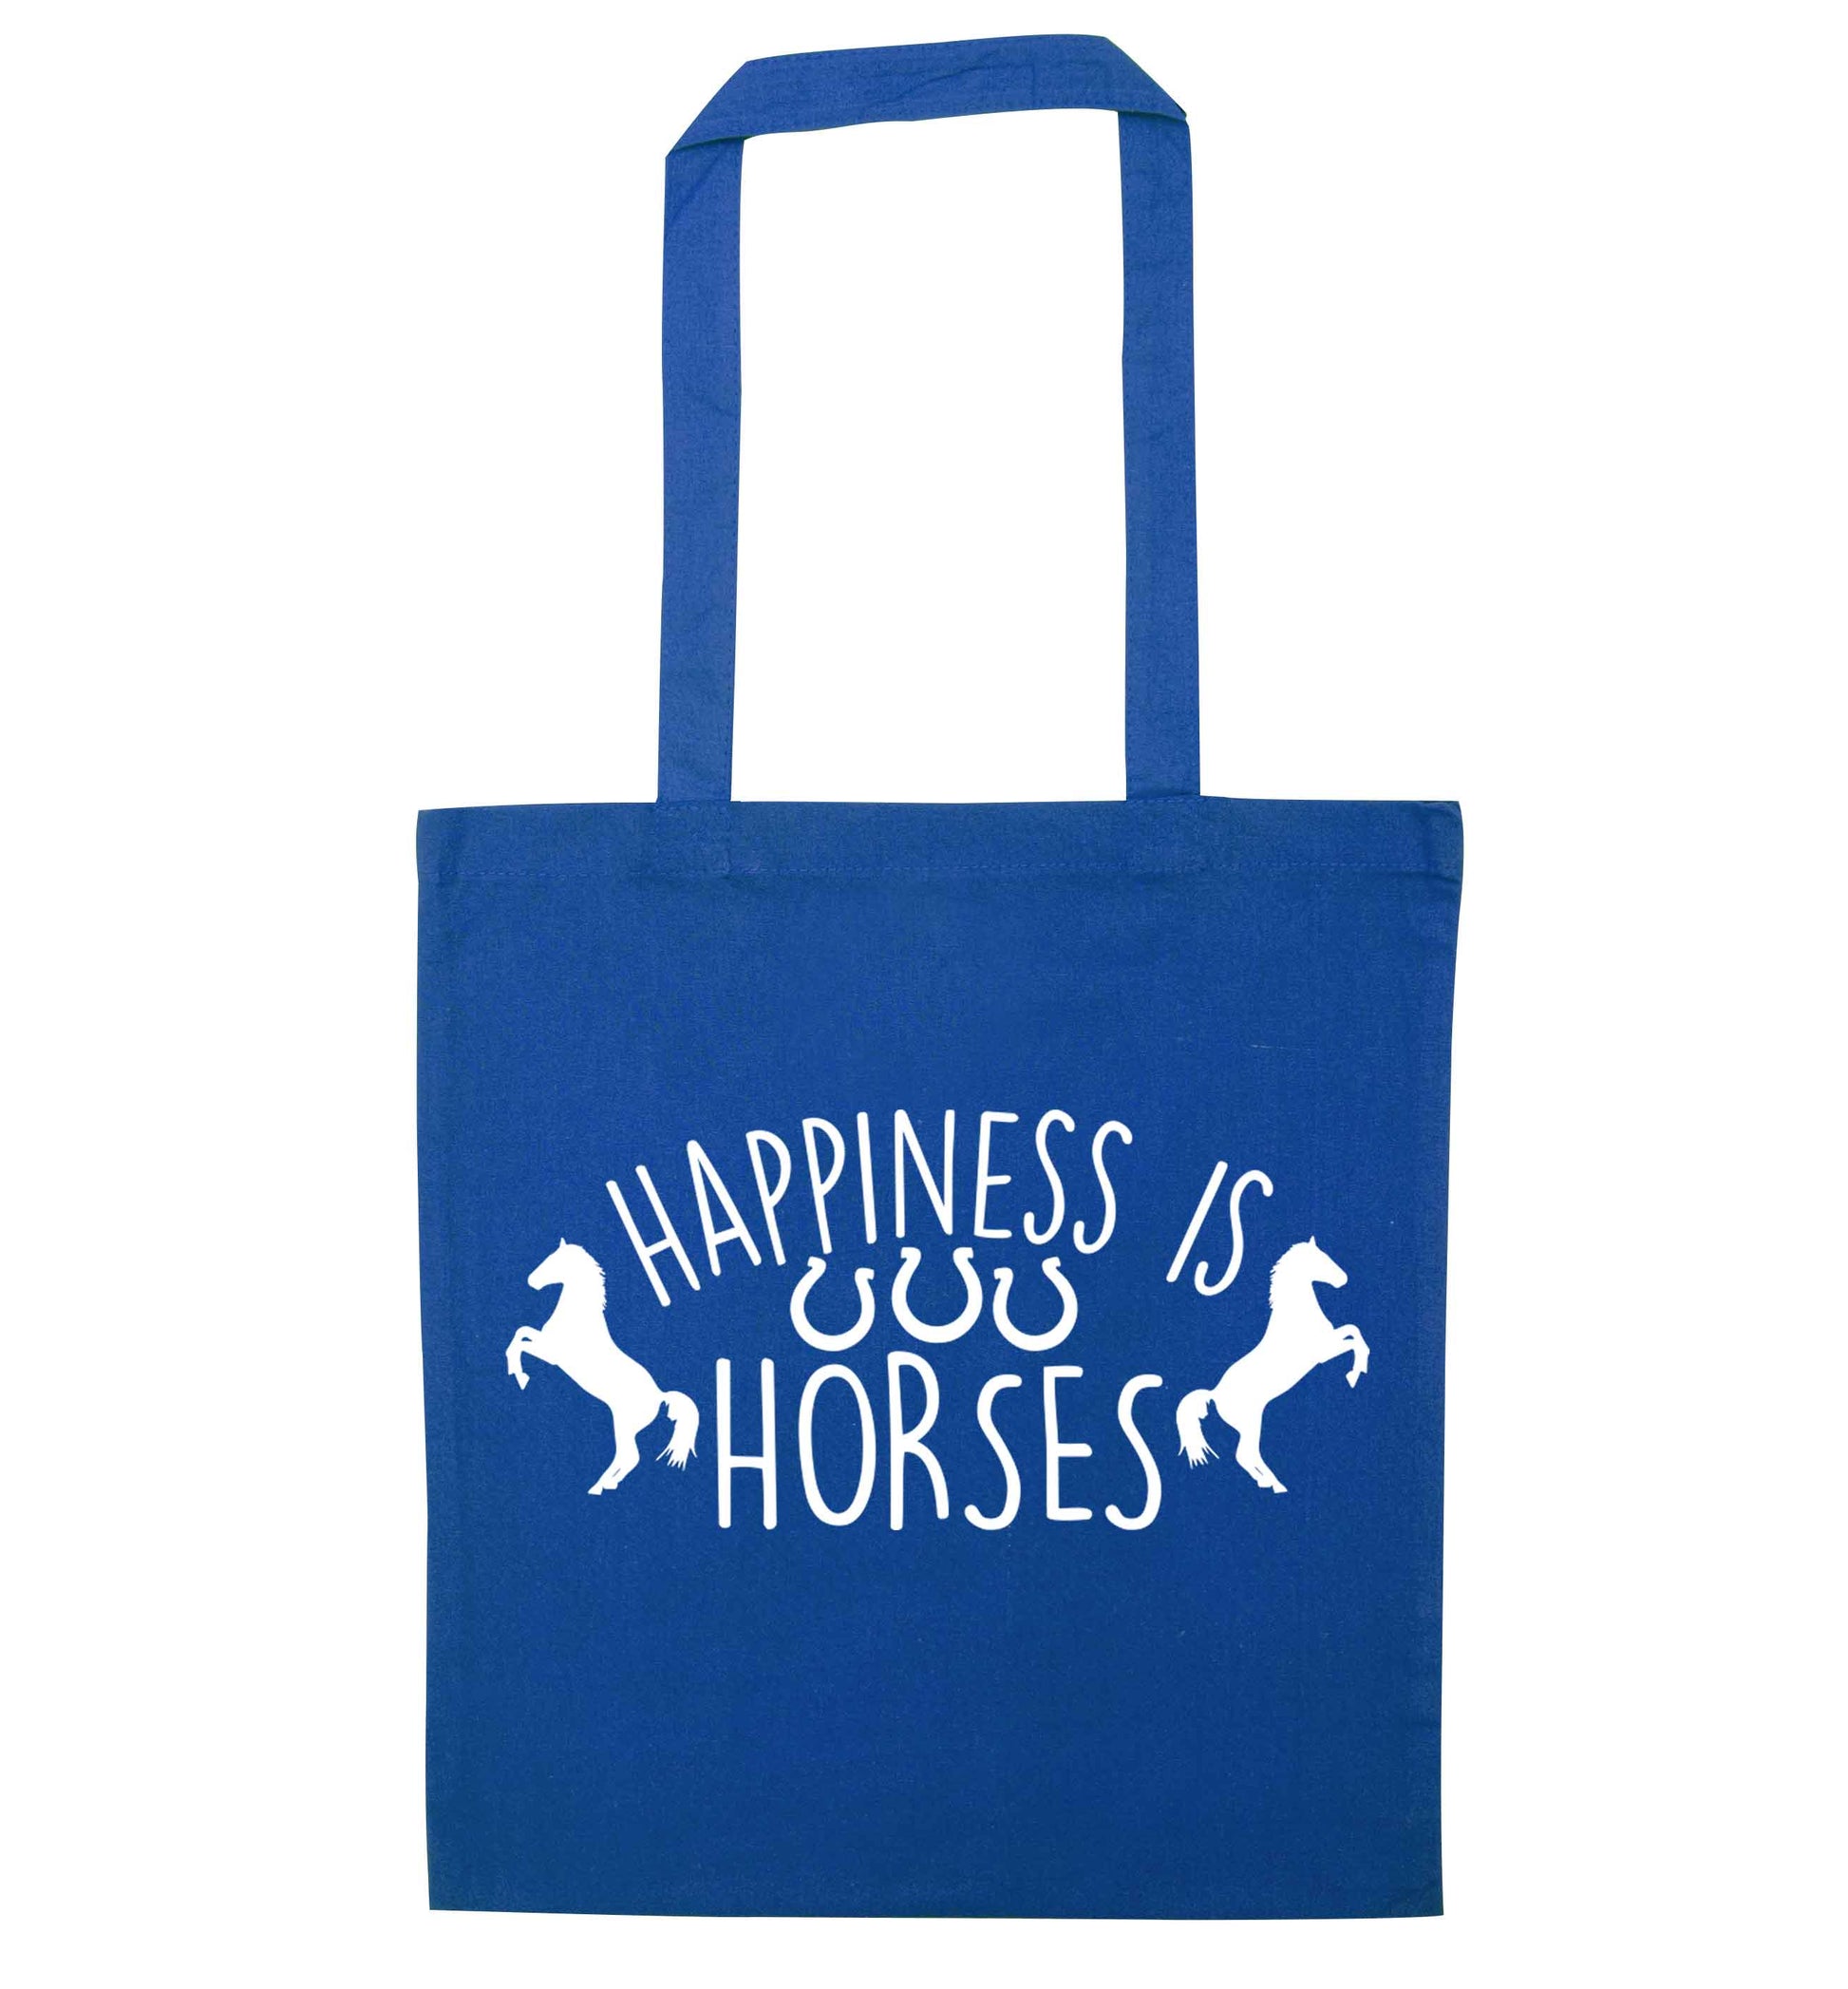 Happiness is horses blue tote bag